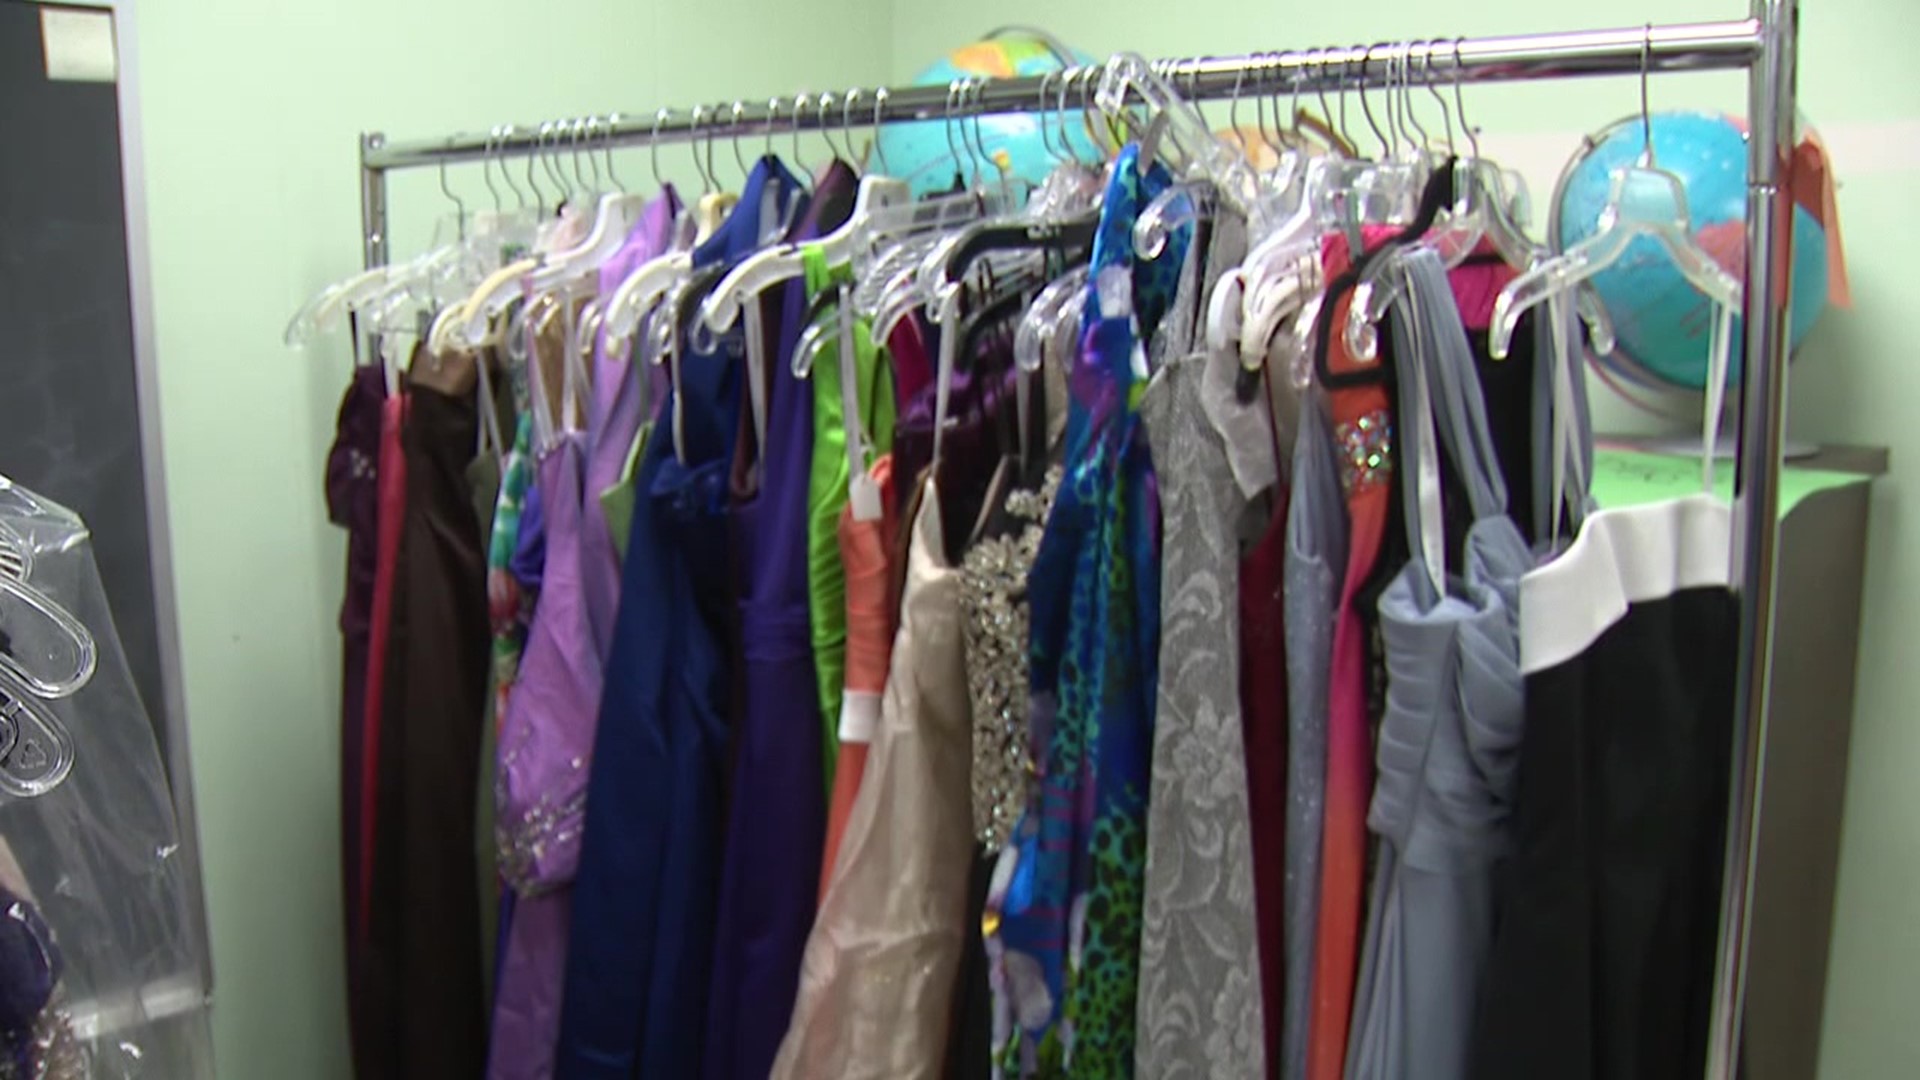 The prom dress sale is on Saturday, April 29, from noon to 3 p.m.